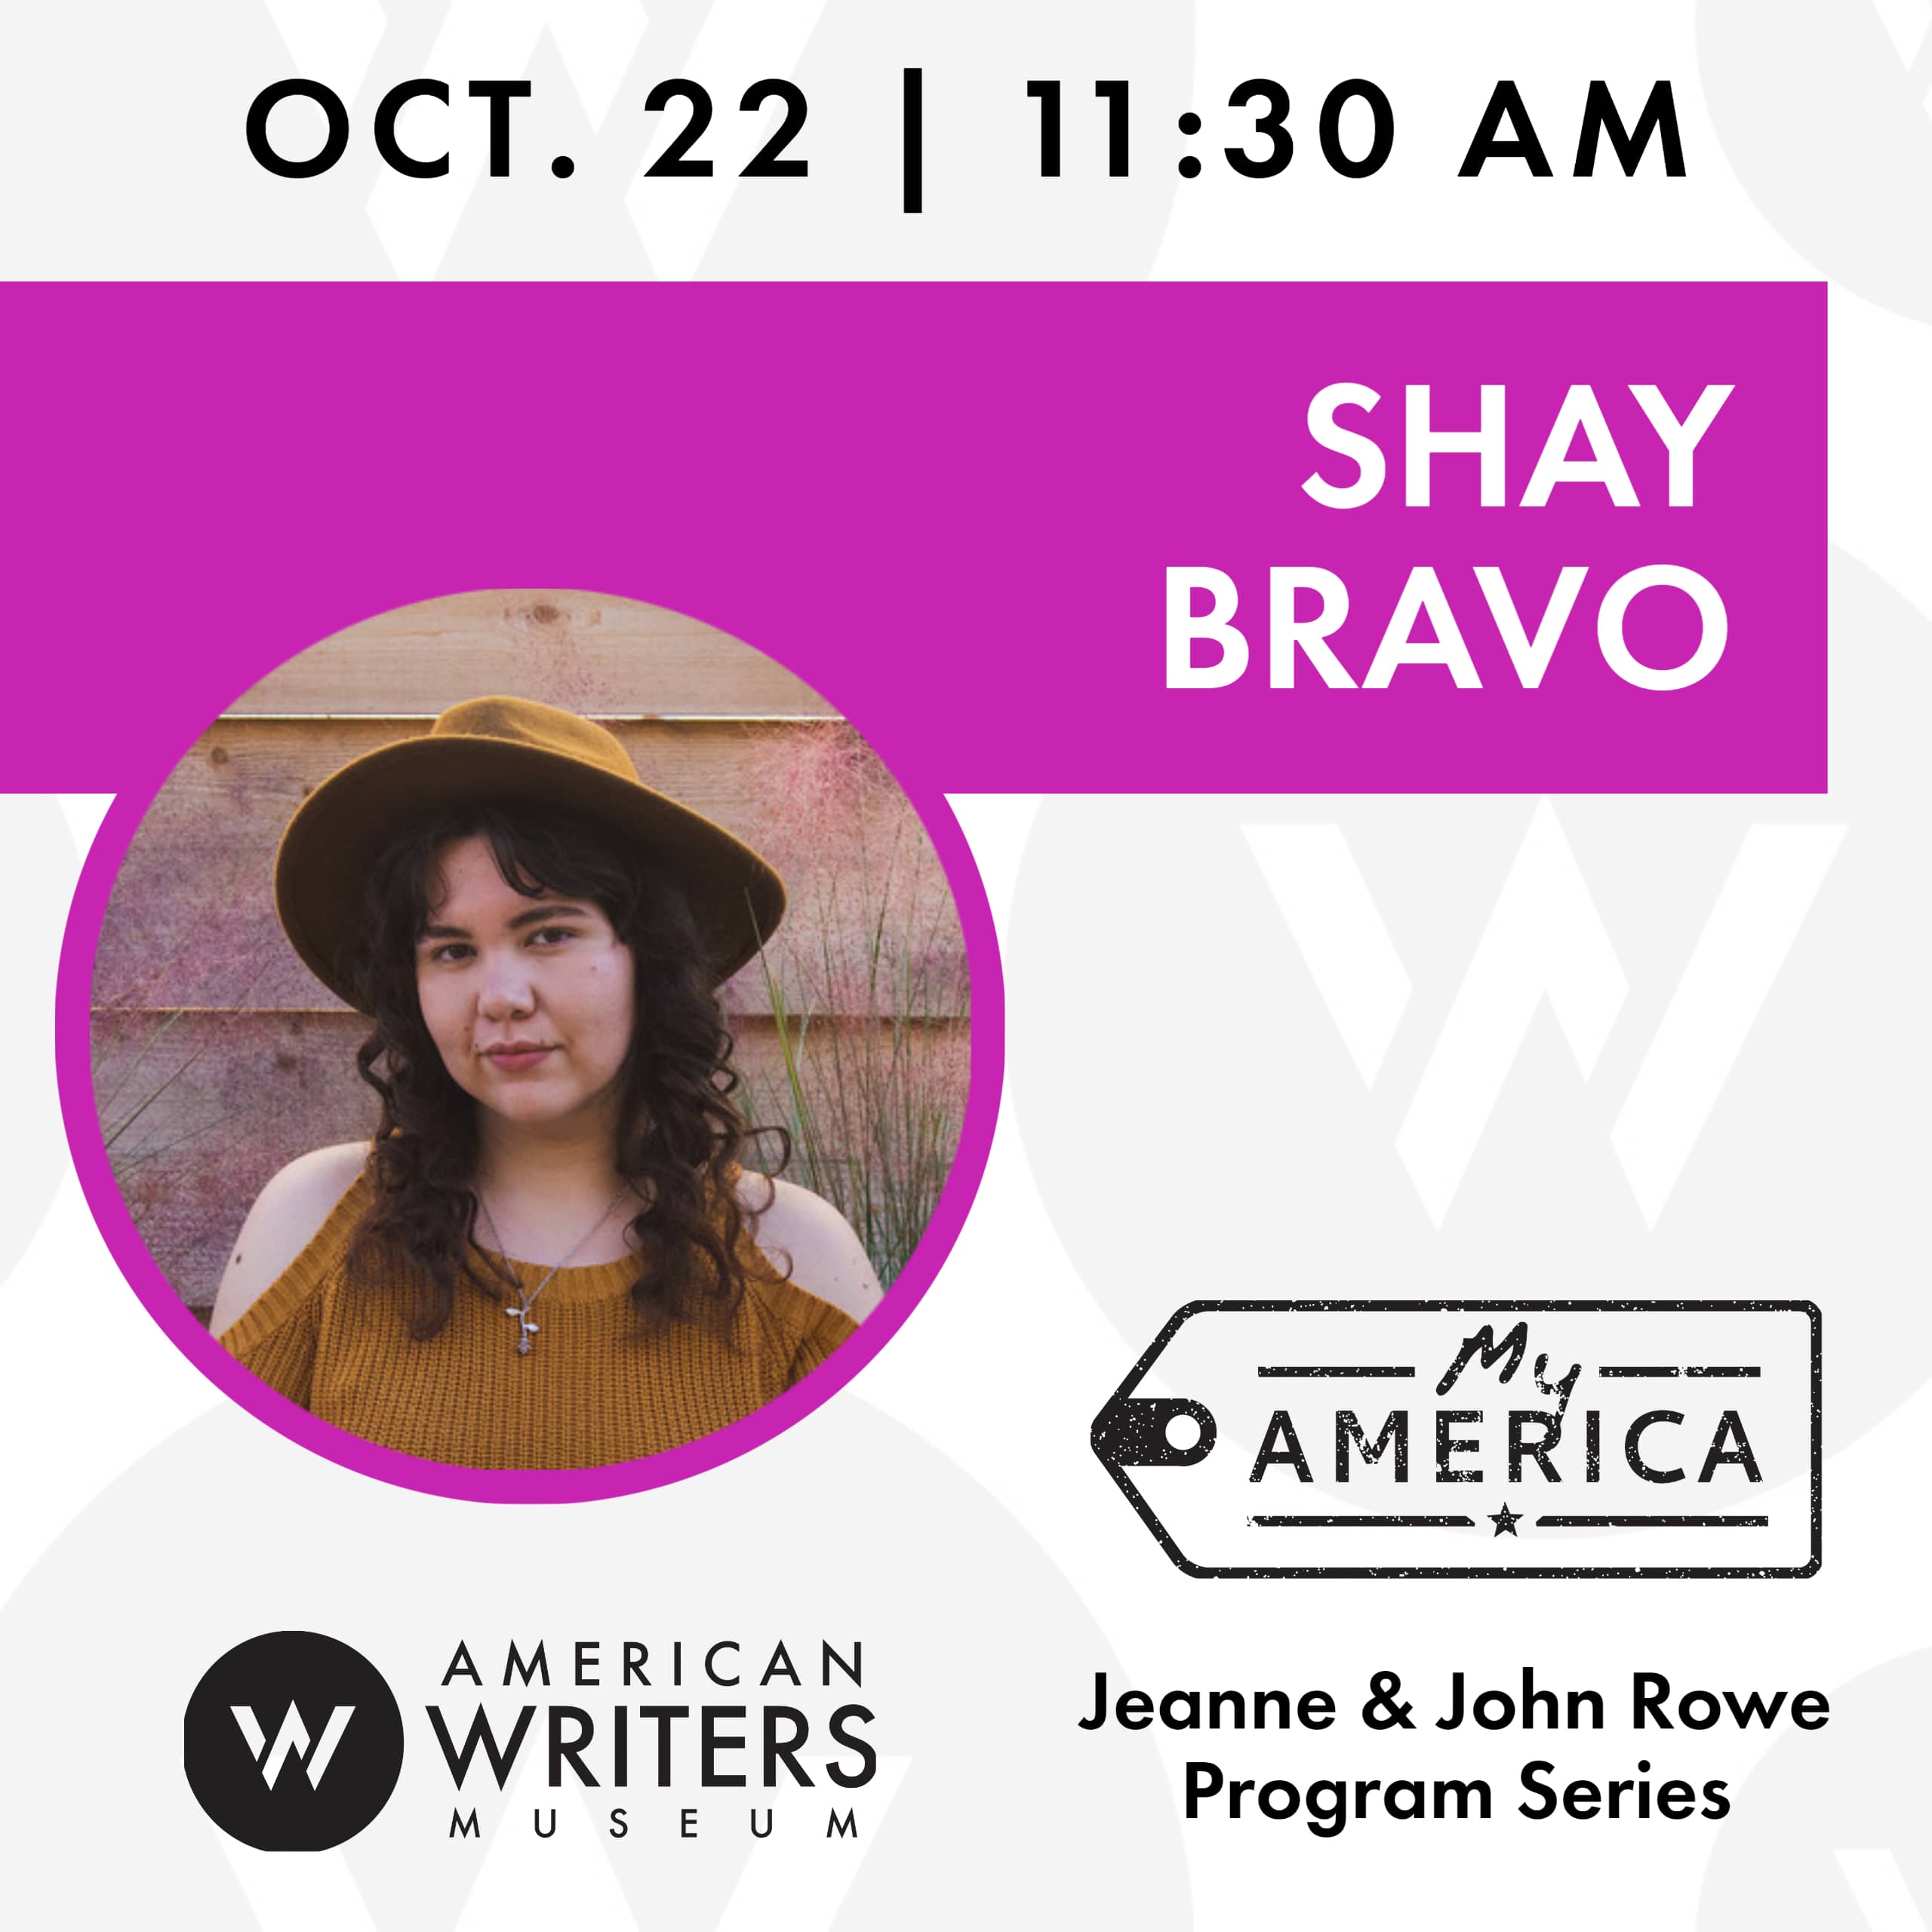 American Writers Museum presents a conversation with Shay Bravo about her new book Historically Inaccurate on October 22 at 11:30 am central